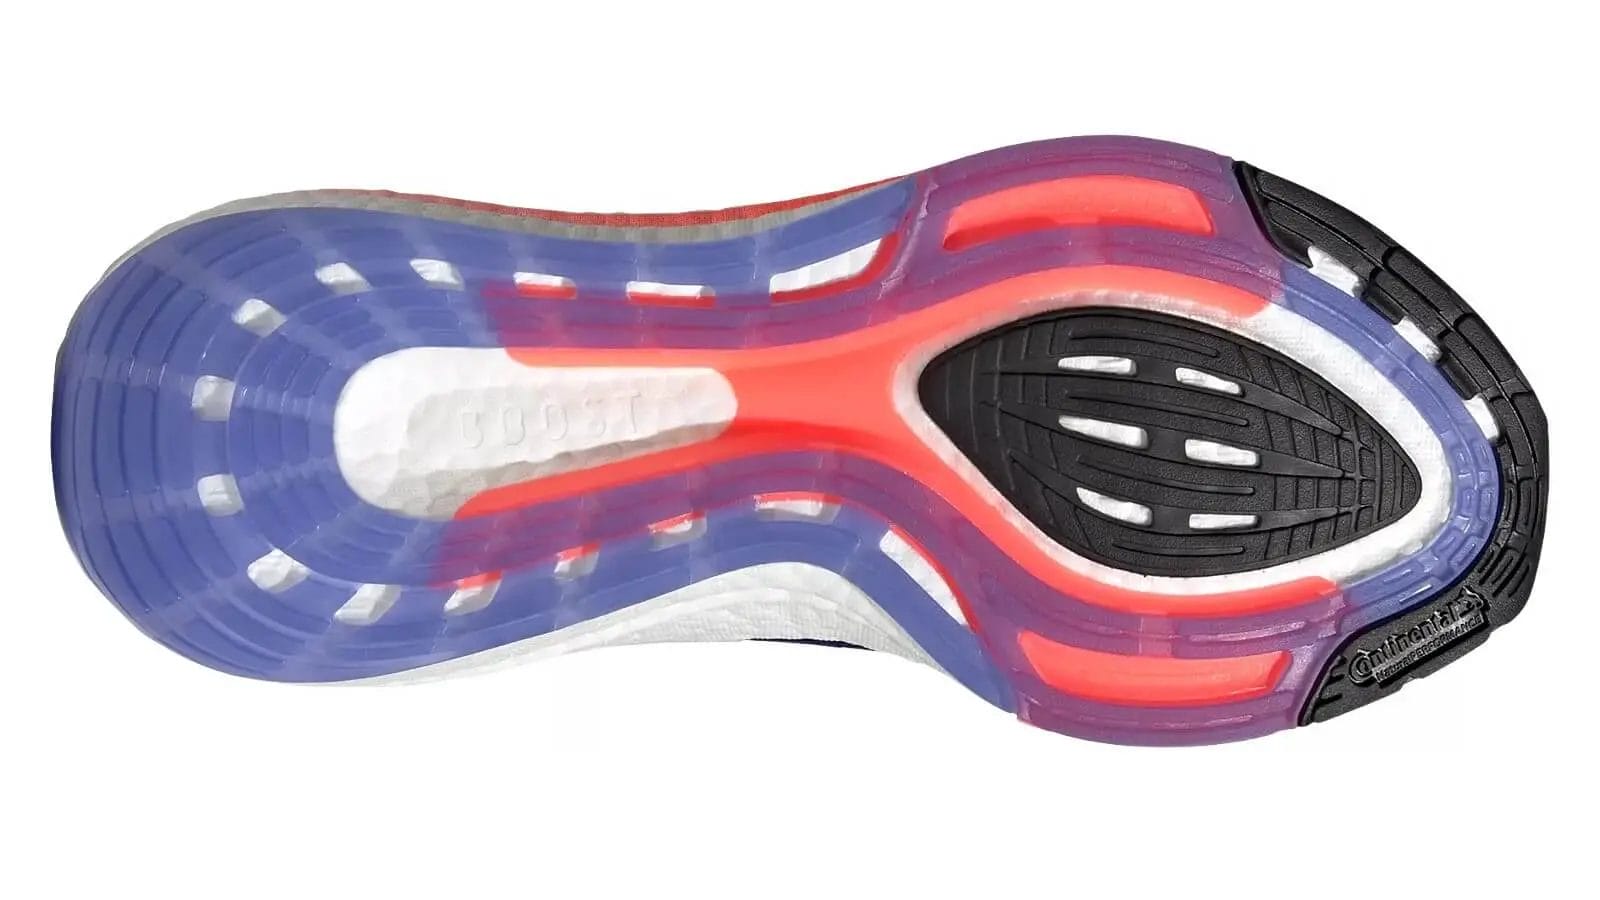 Multicolored outsole with continental tire rubber for durability.